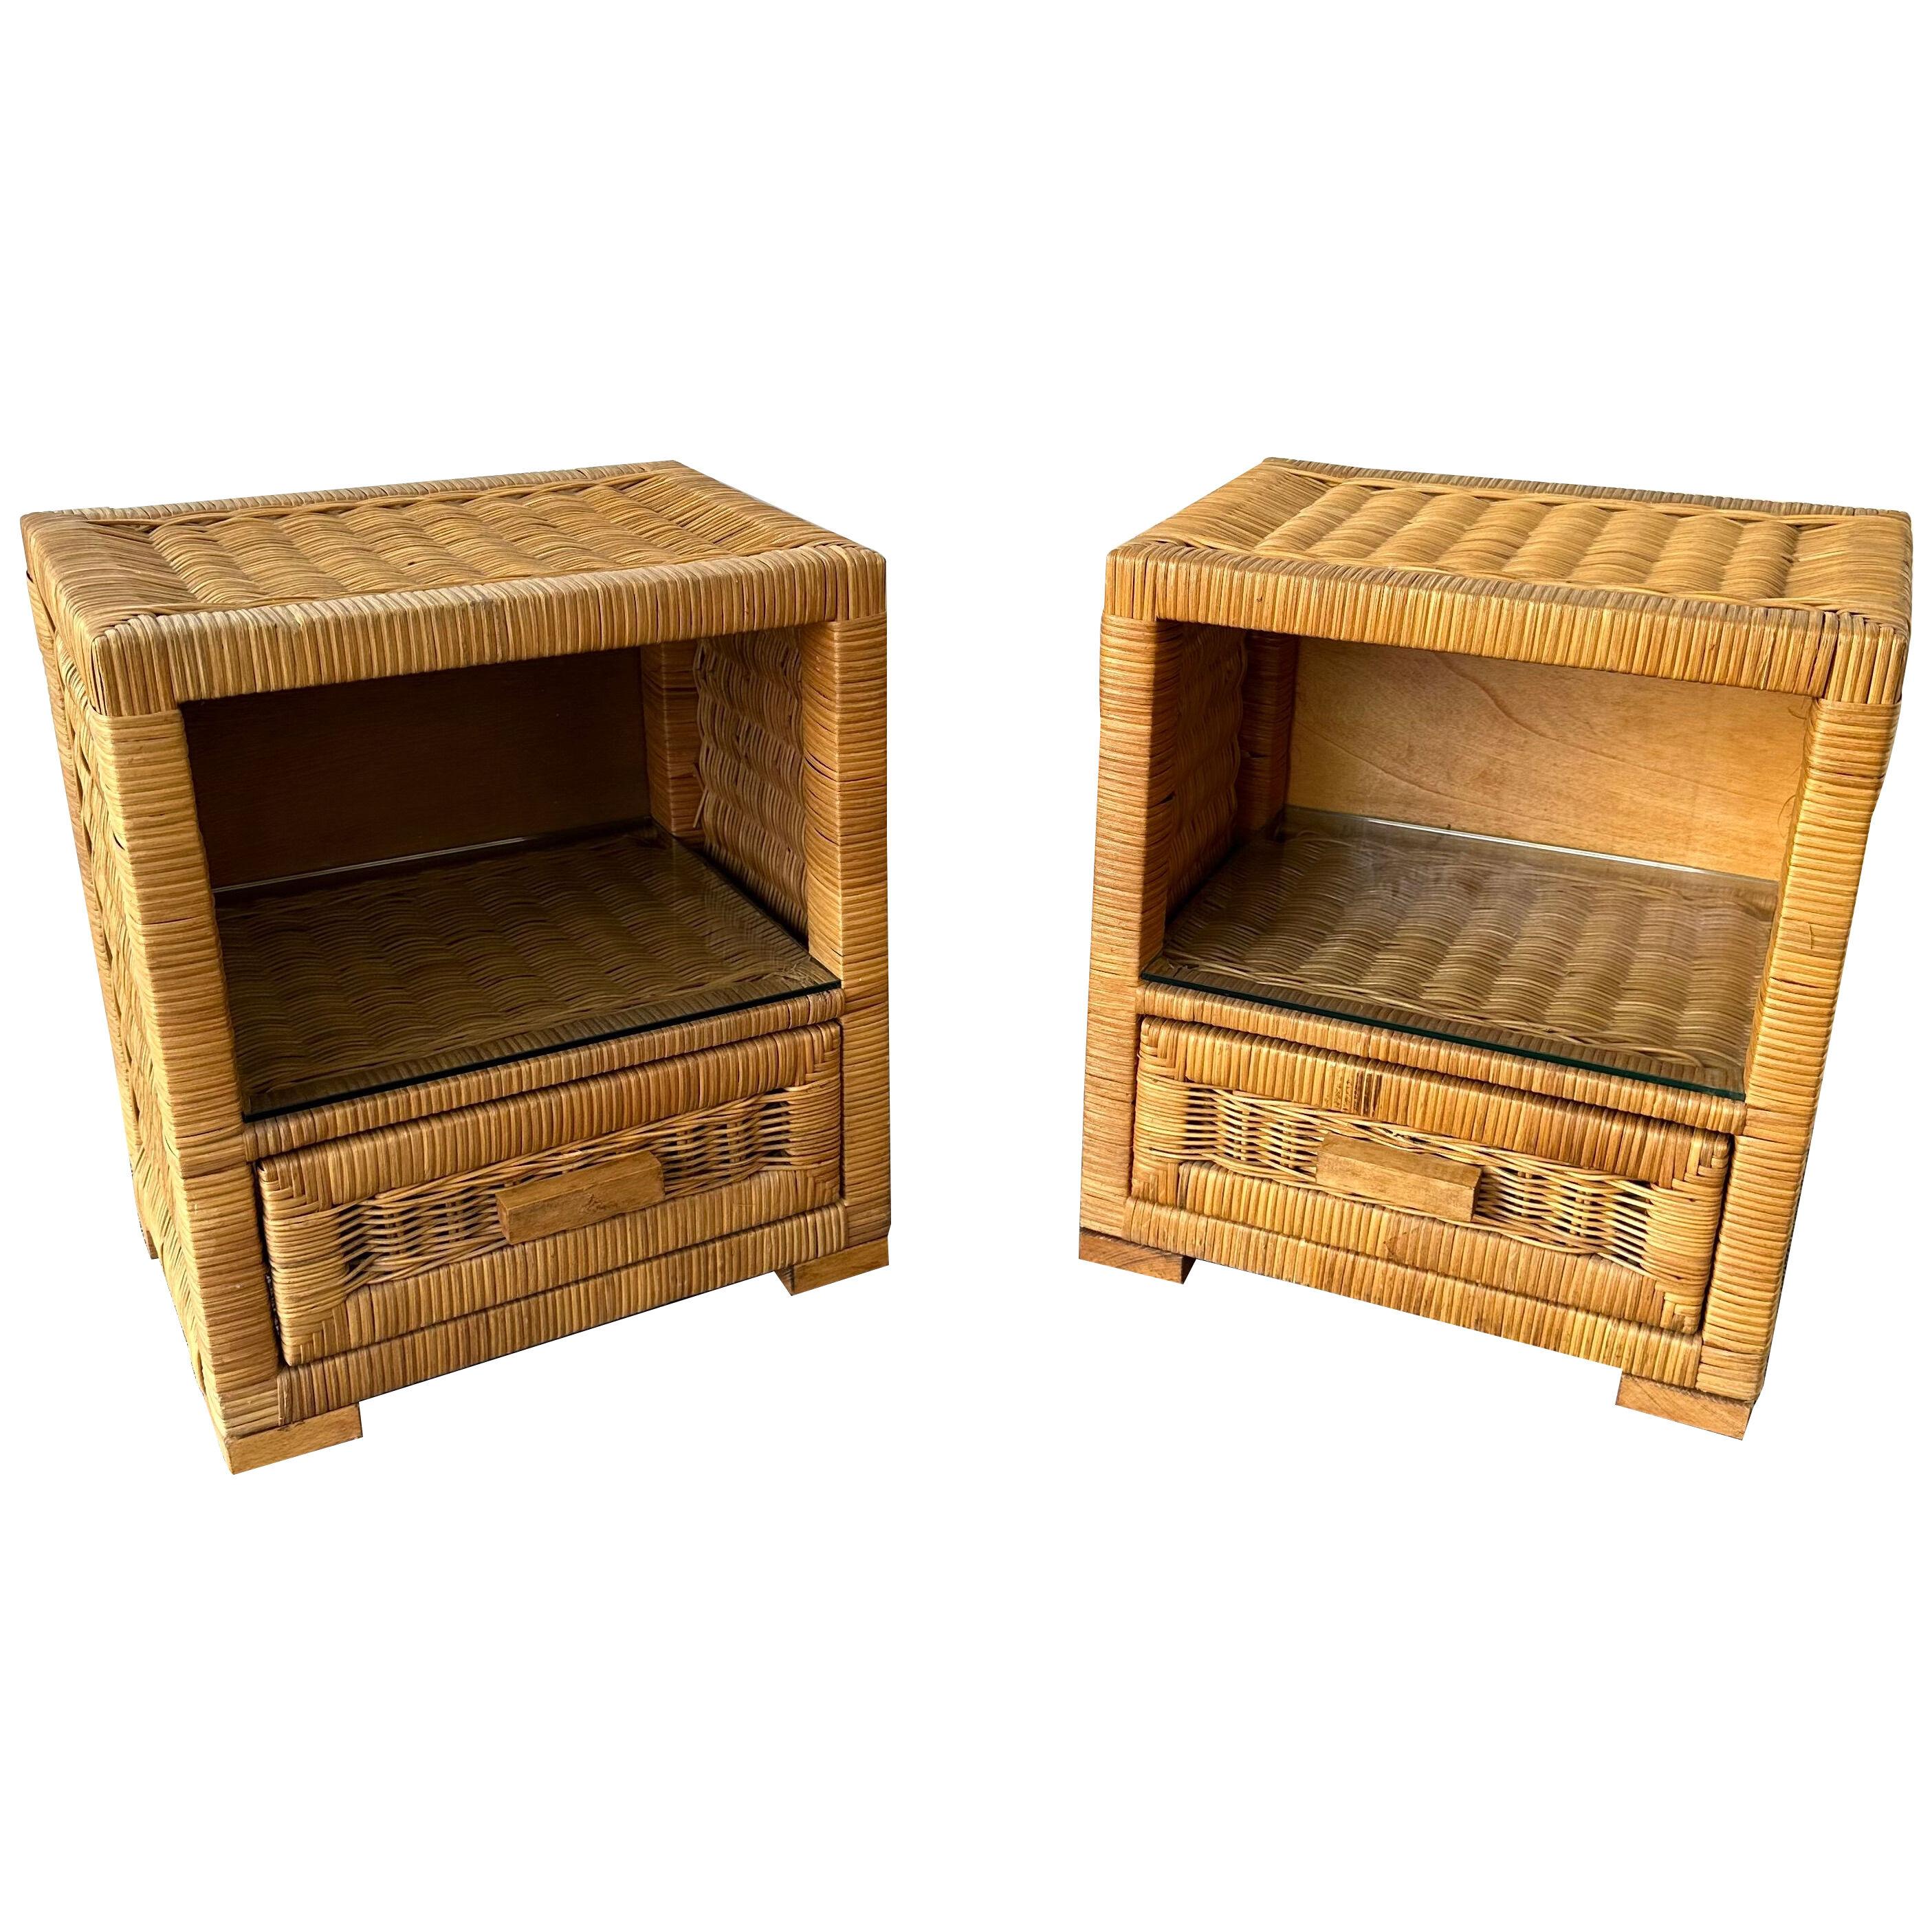 Pair of Rattan Bedside Tables by Tito Agnoli, Italy, 1970s